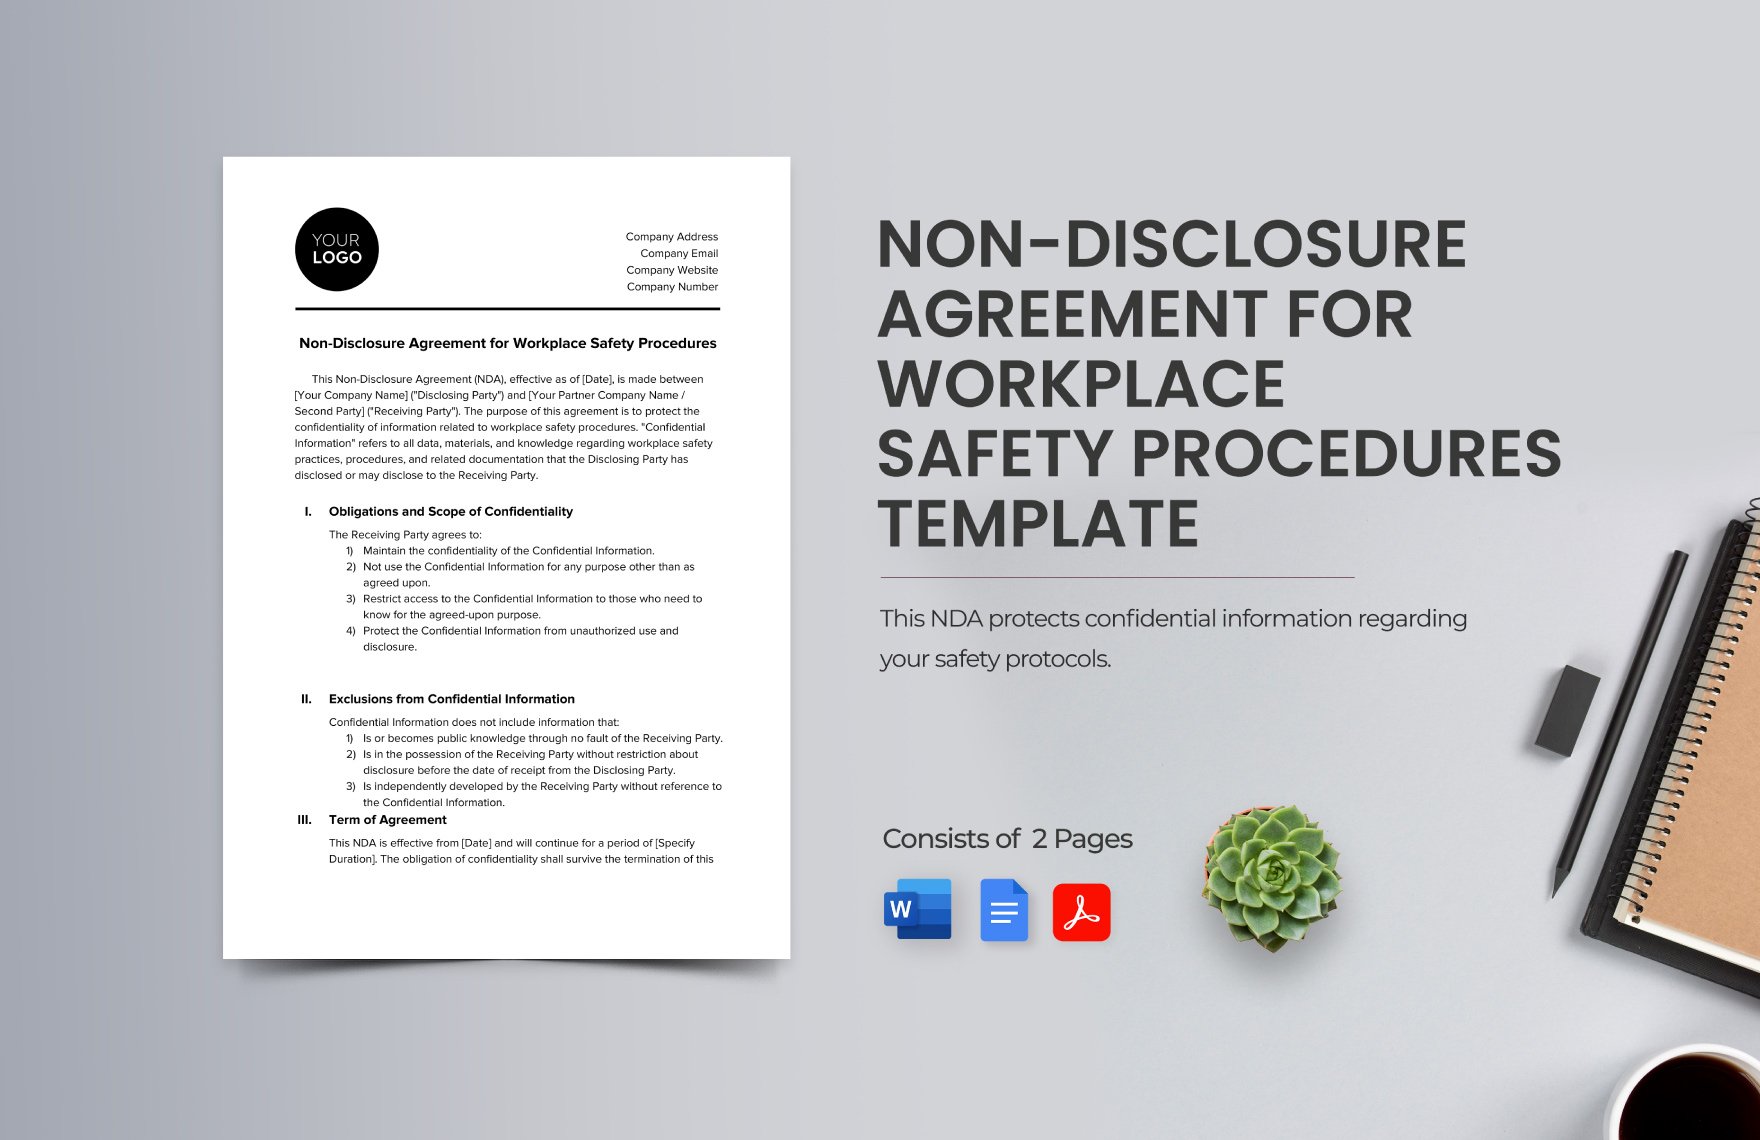 Non-Disclosure Agreement for Workplace Safety Procedures Template